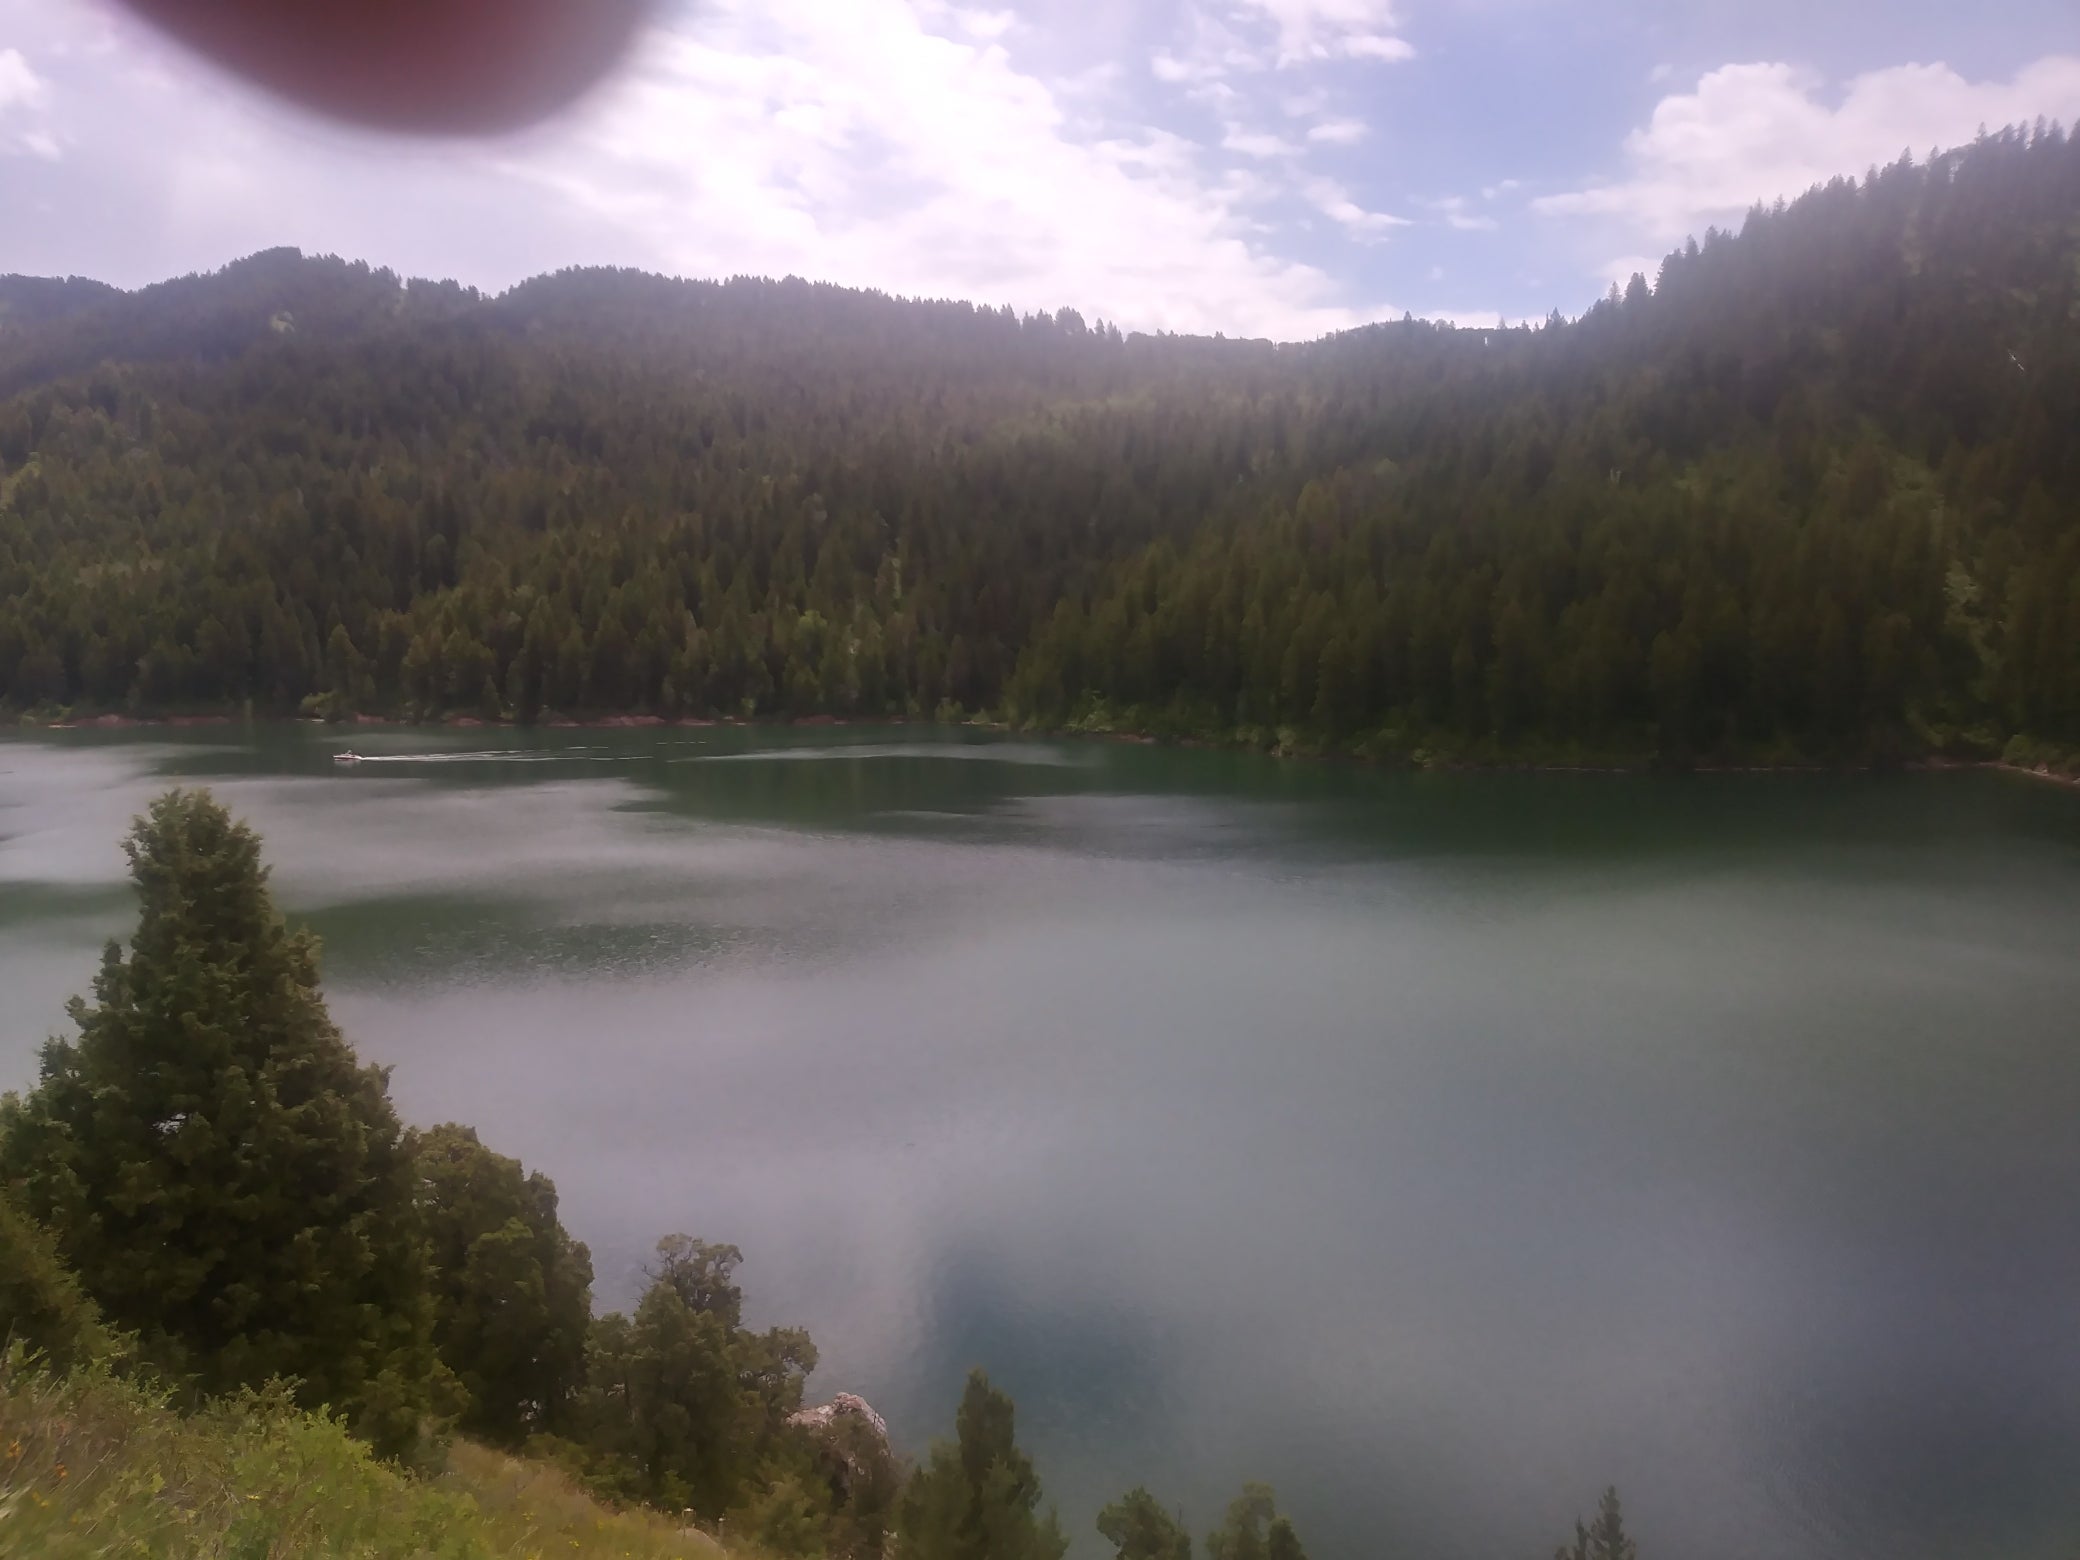 Camper submitted image from Palisades Reservoir - 3